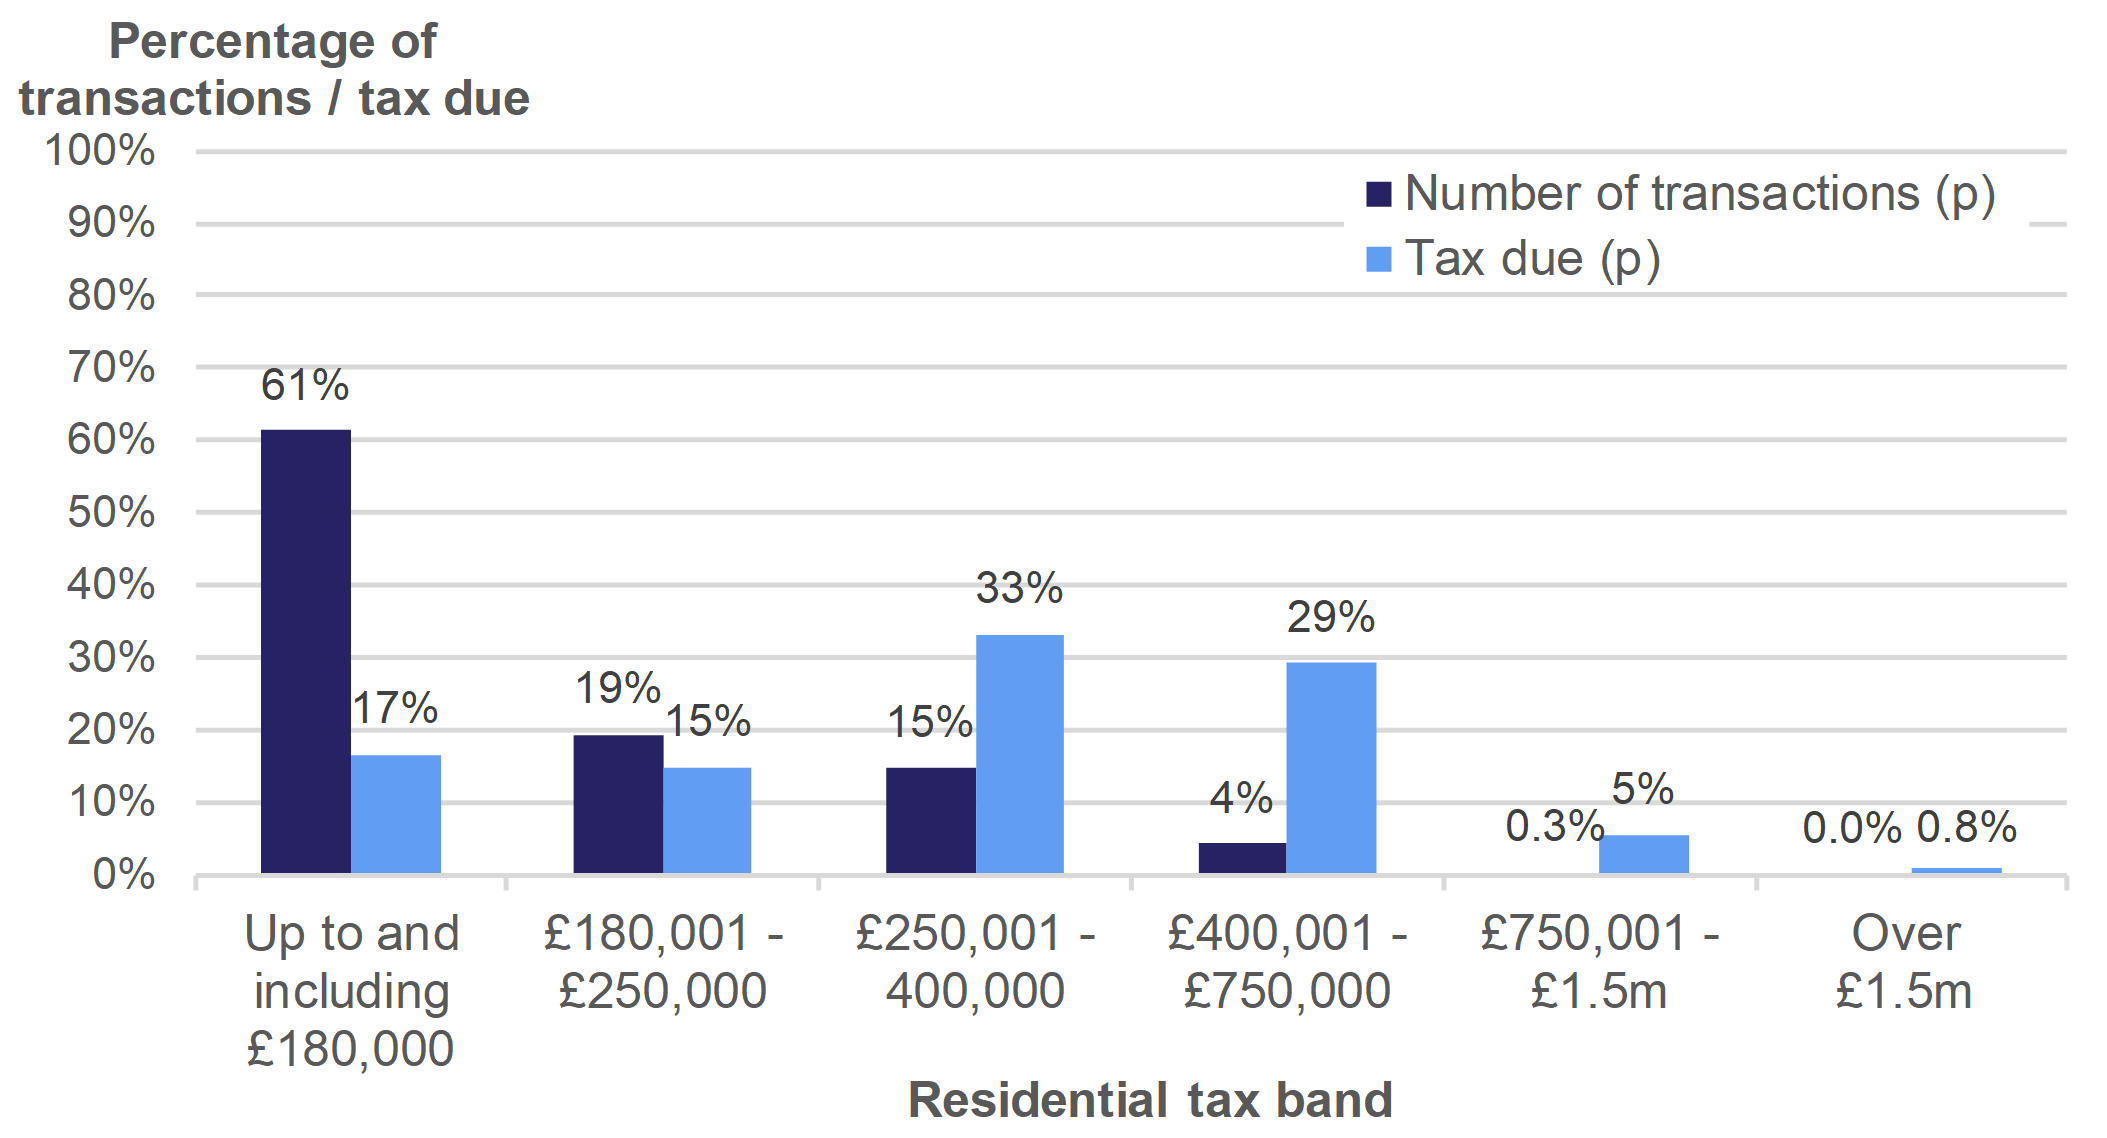 Figure 3.3 shows the number of residential transactions and amount of tax due, by residential tax band. Data is presented as the percentage of transactions or tax due and relates to transactions effective in July to September 2019.